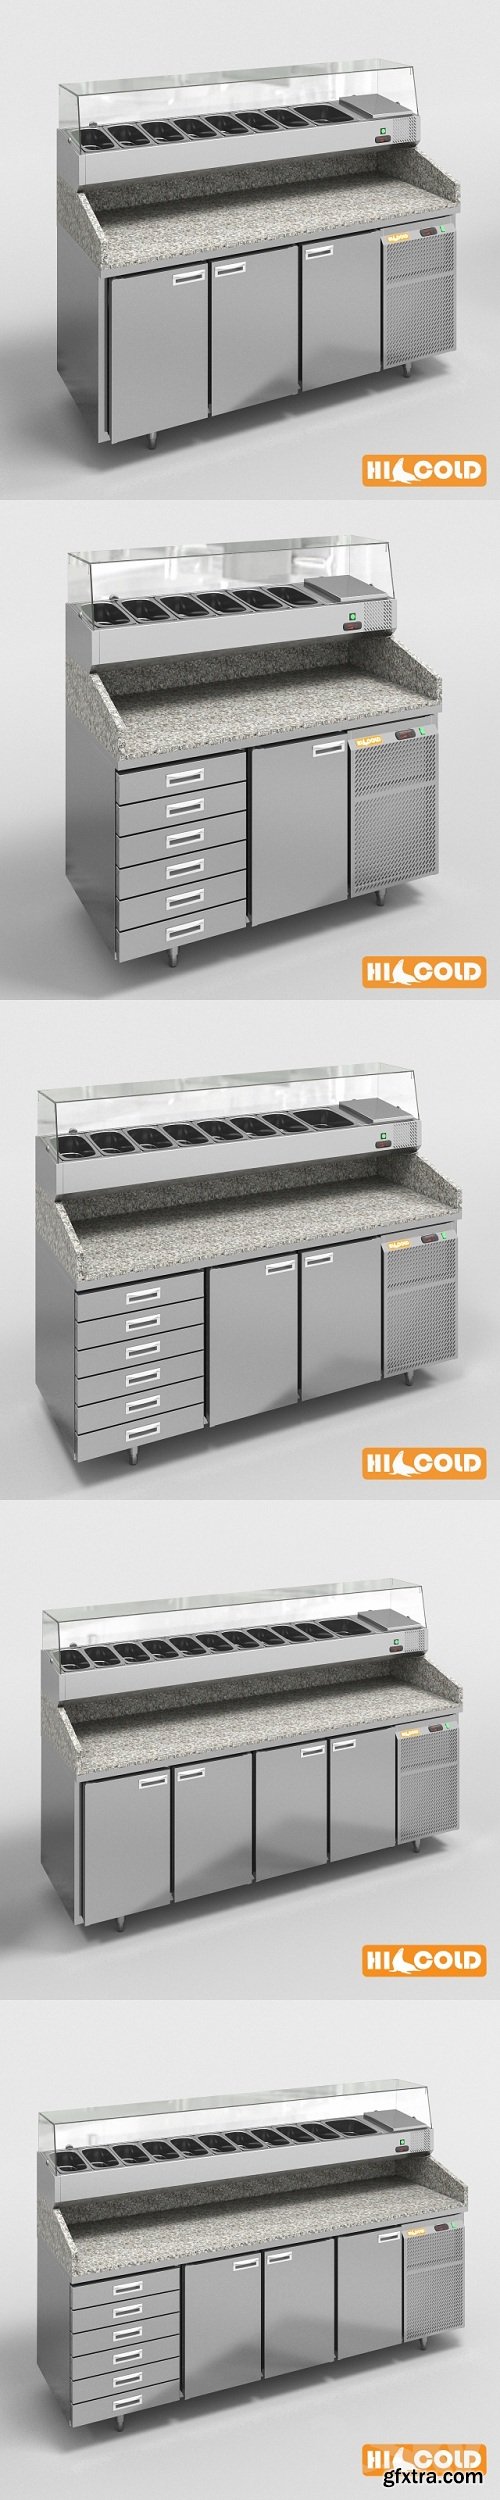 HiCold refrigeration pizzeria, stainless steel with stone countertop